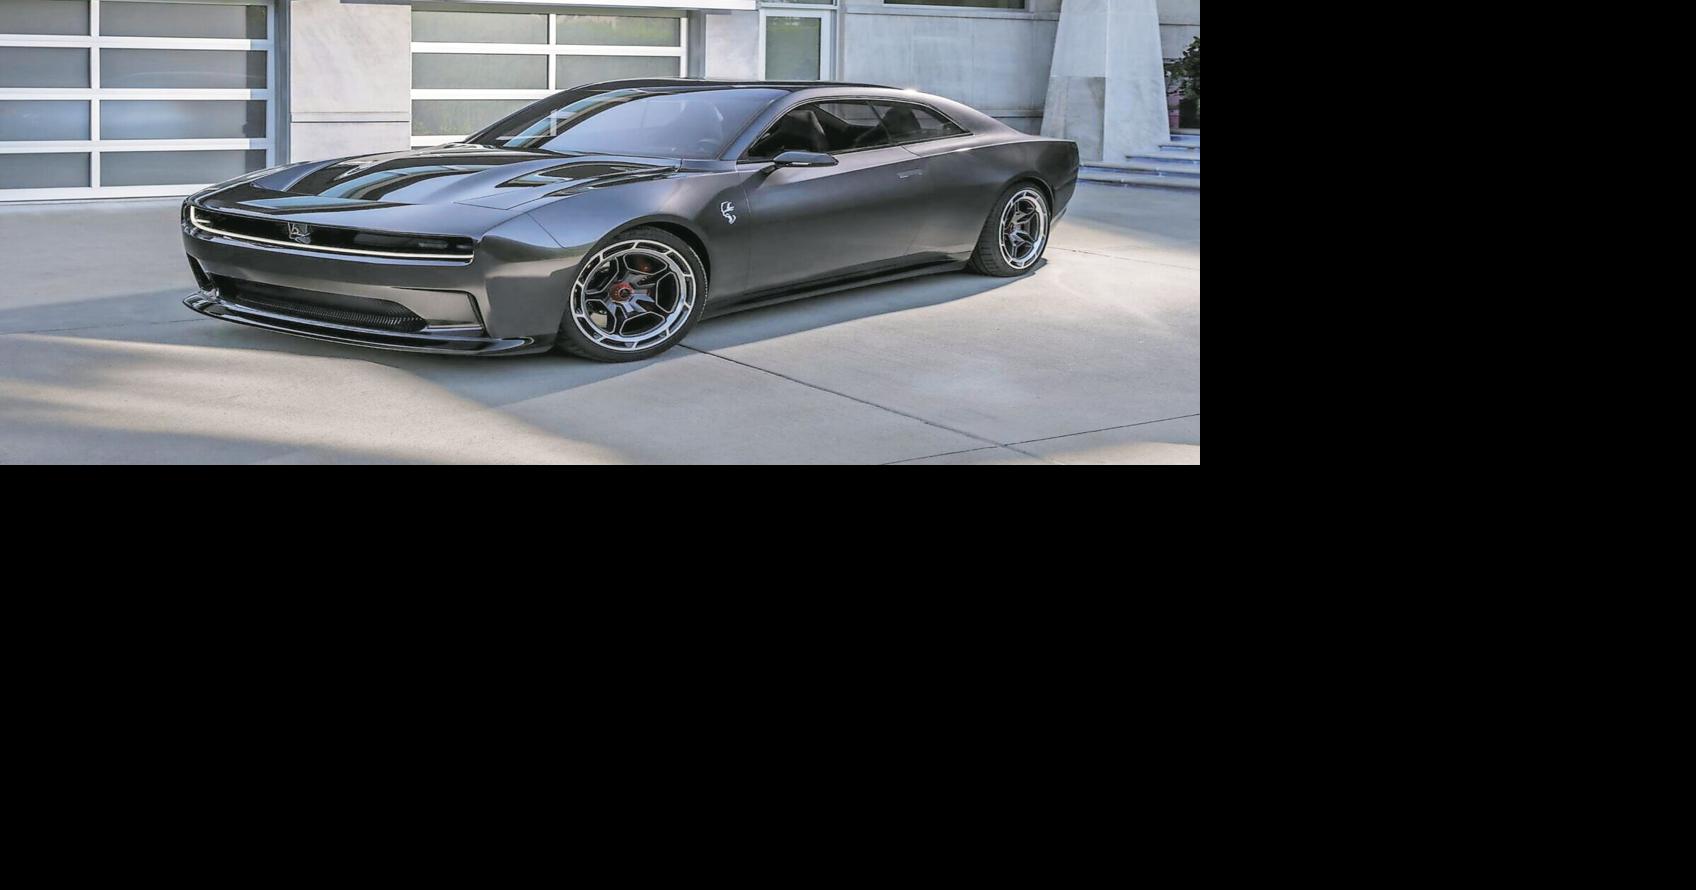 Dodge Charger Daytona SRT Concept The Electric Muscle Car of 2024